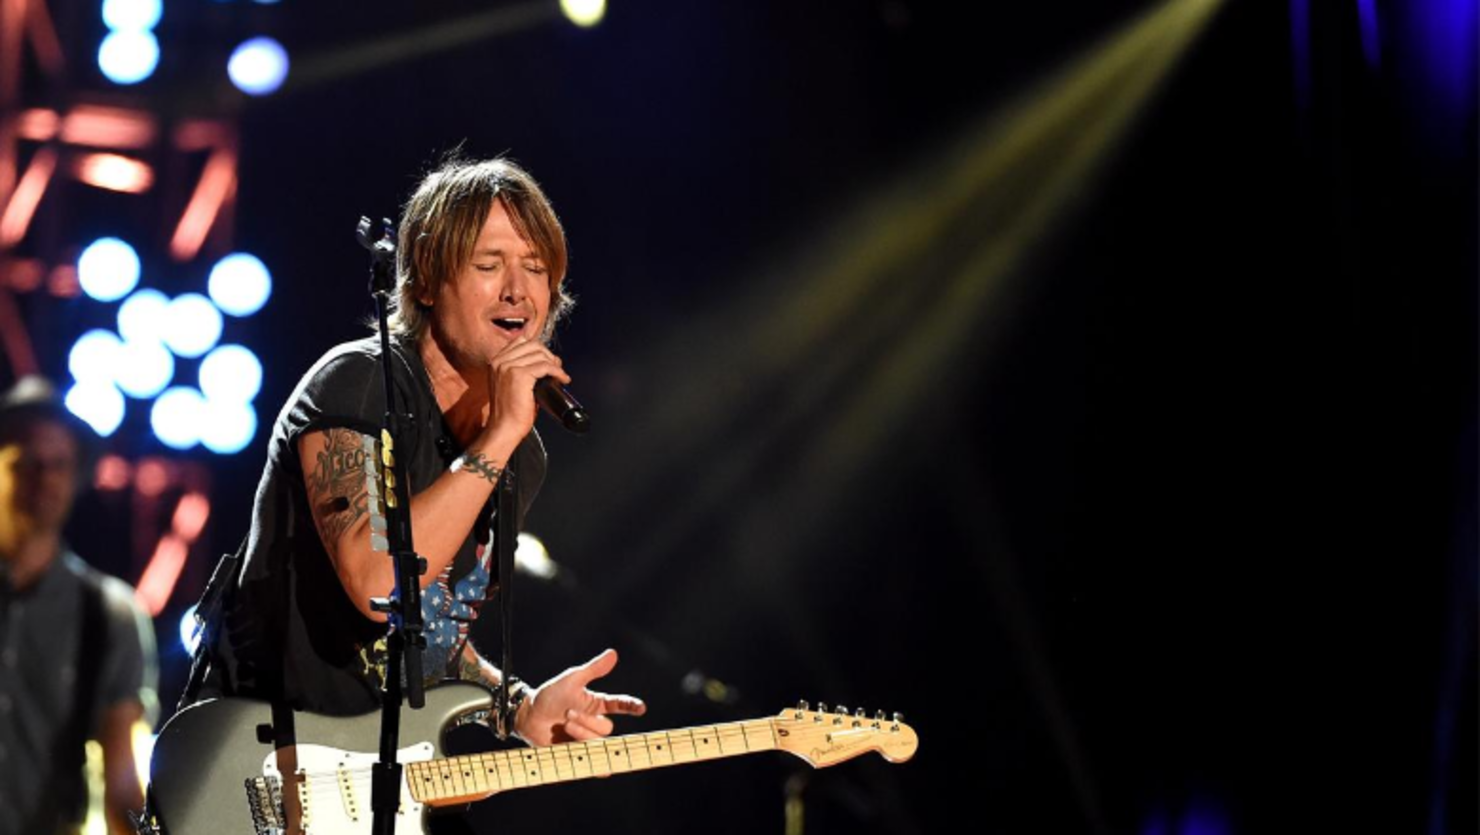 Keith Urban Releases New Song From Album, 'Change Your Mind